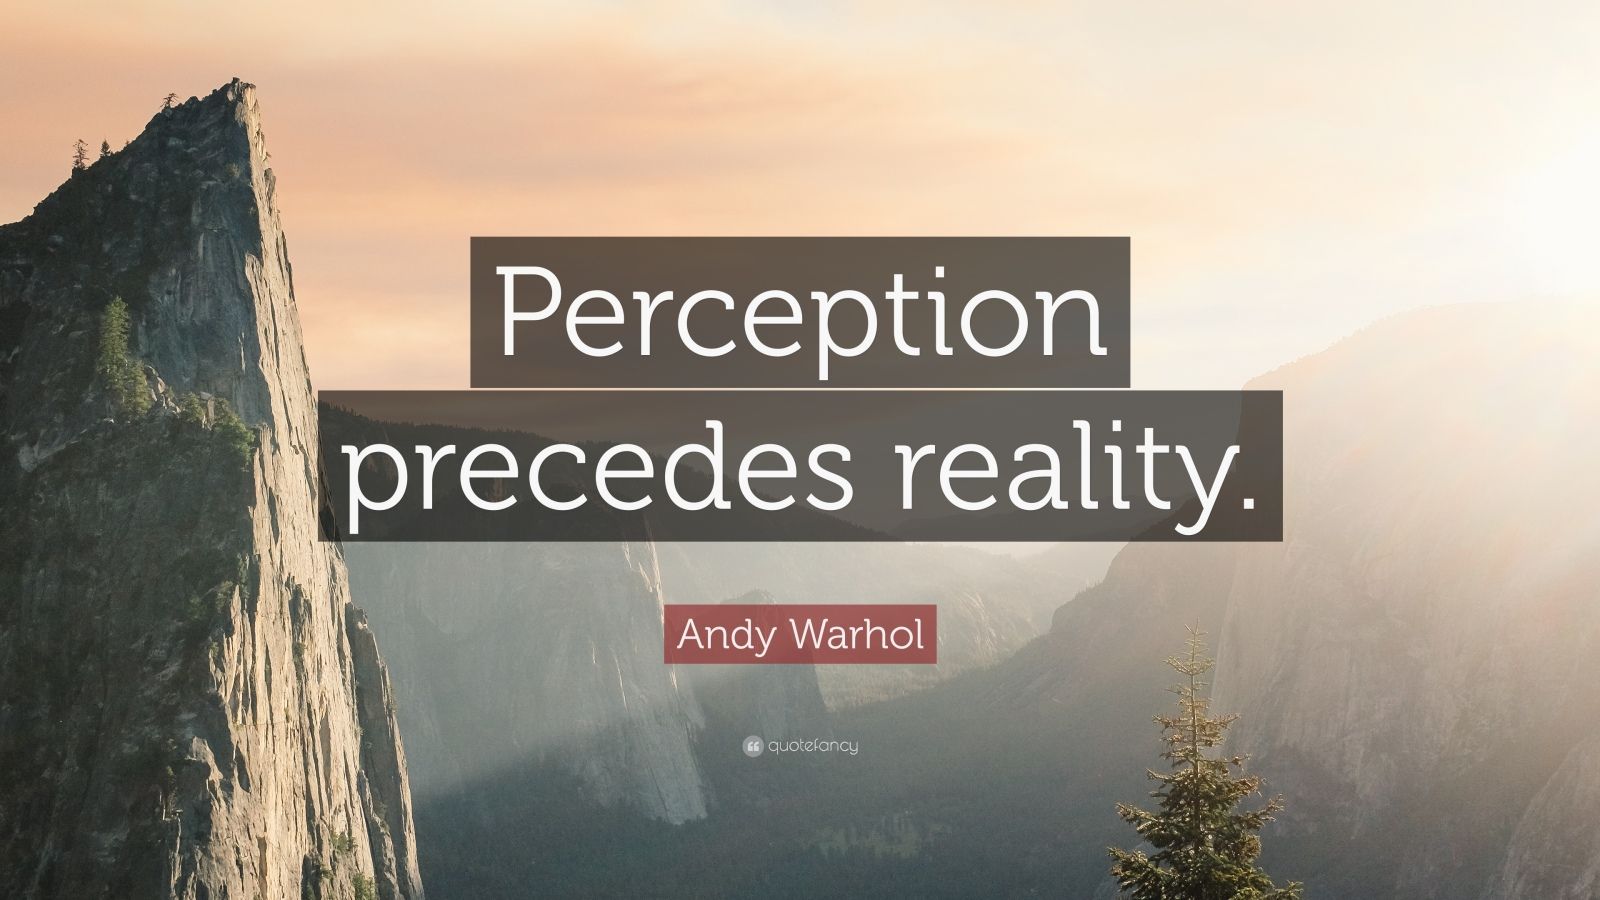 Andy Warhol Quote: “Perception precedes reality.”